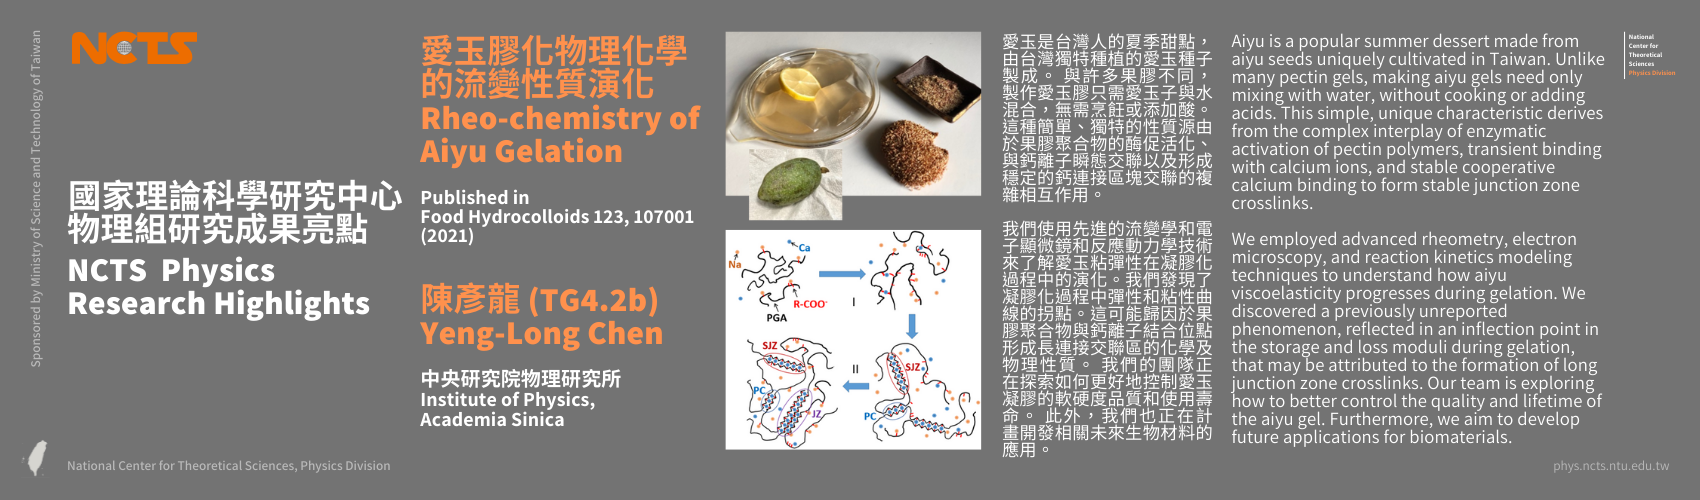 NCTS Physics Research Highlights - Yeng-Long Chen "Rheo-chemistry of Aiyu Gelation (2021)"